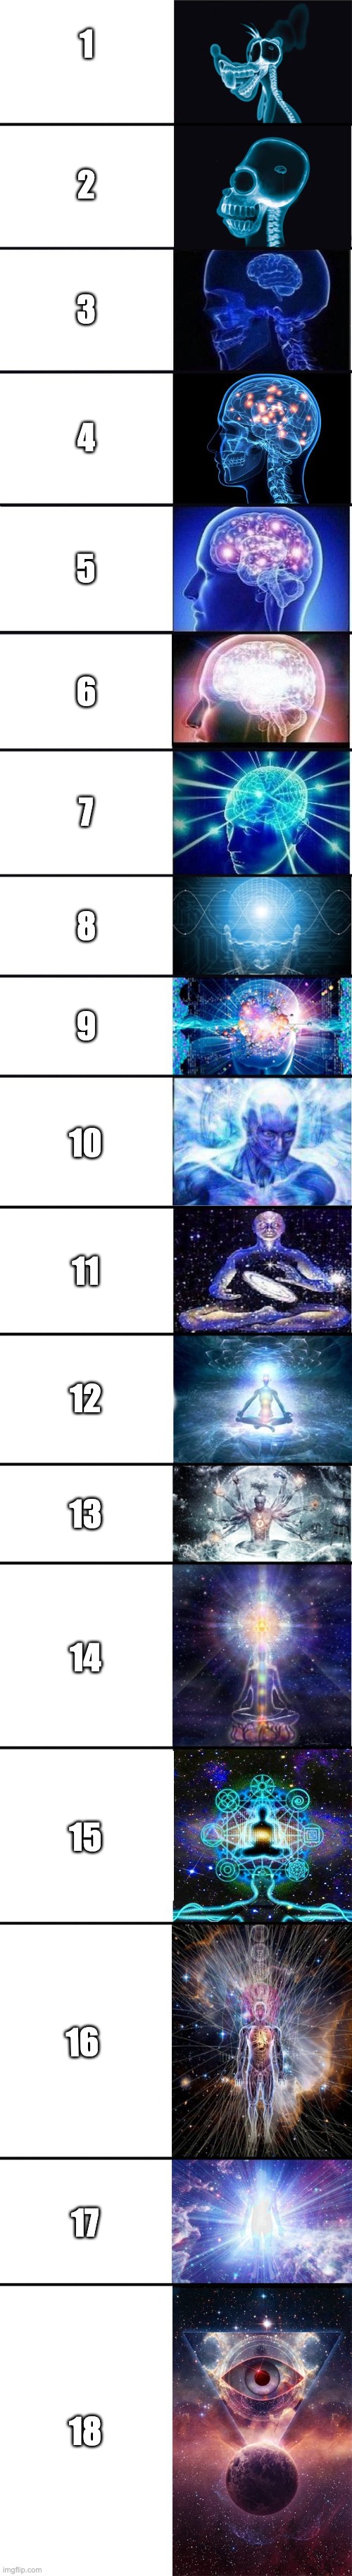 1-18 | 1; 2; 3; 4; 5; 6; 7; 8; 9; 10; 11; 12; 13; 14; 15; 16; 17; 18 | image tagged in expanding brain 9001 | made w/ Lifeismeme meme maker